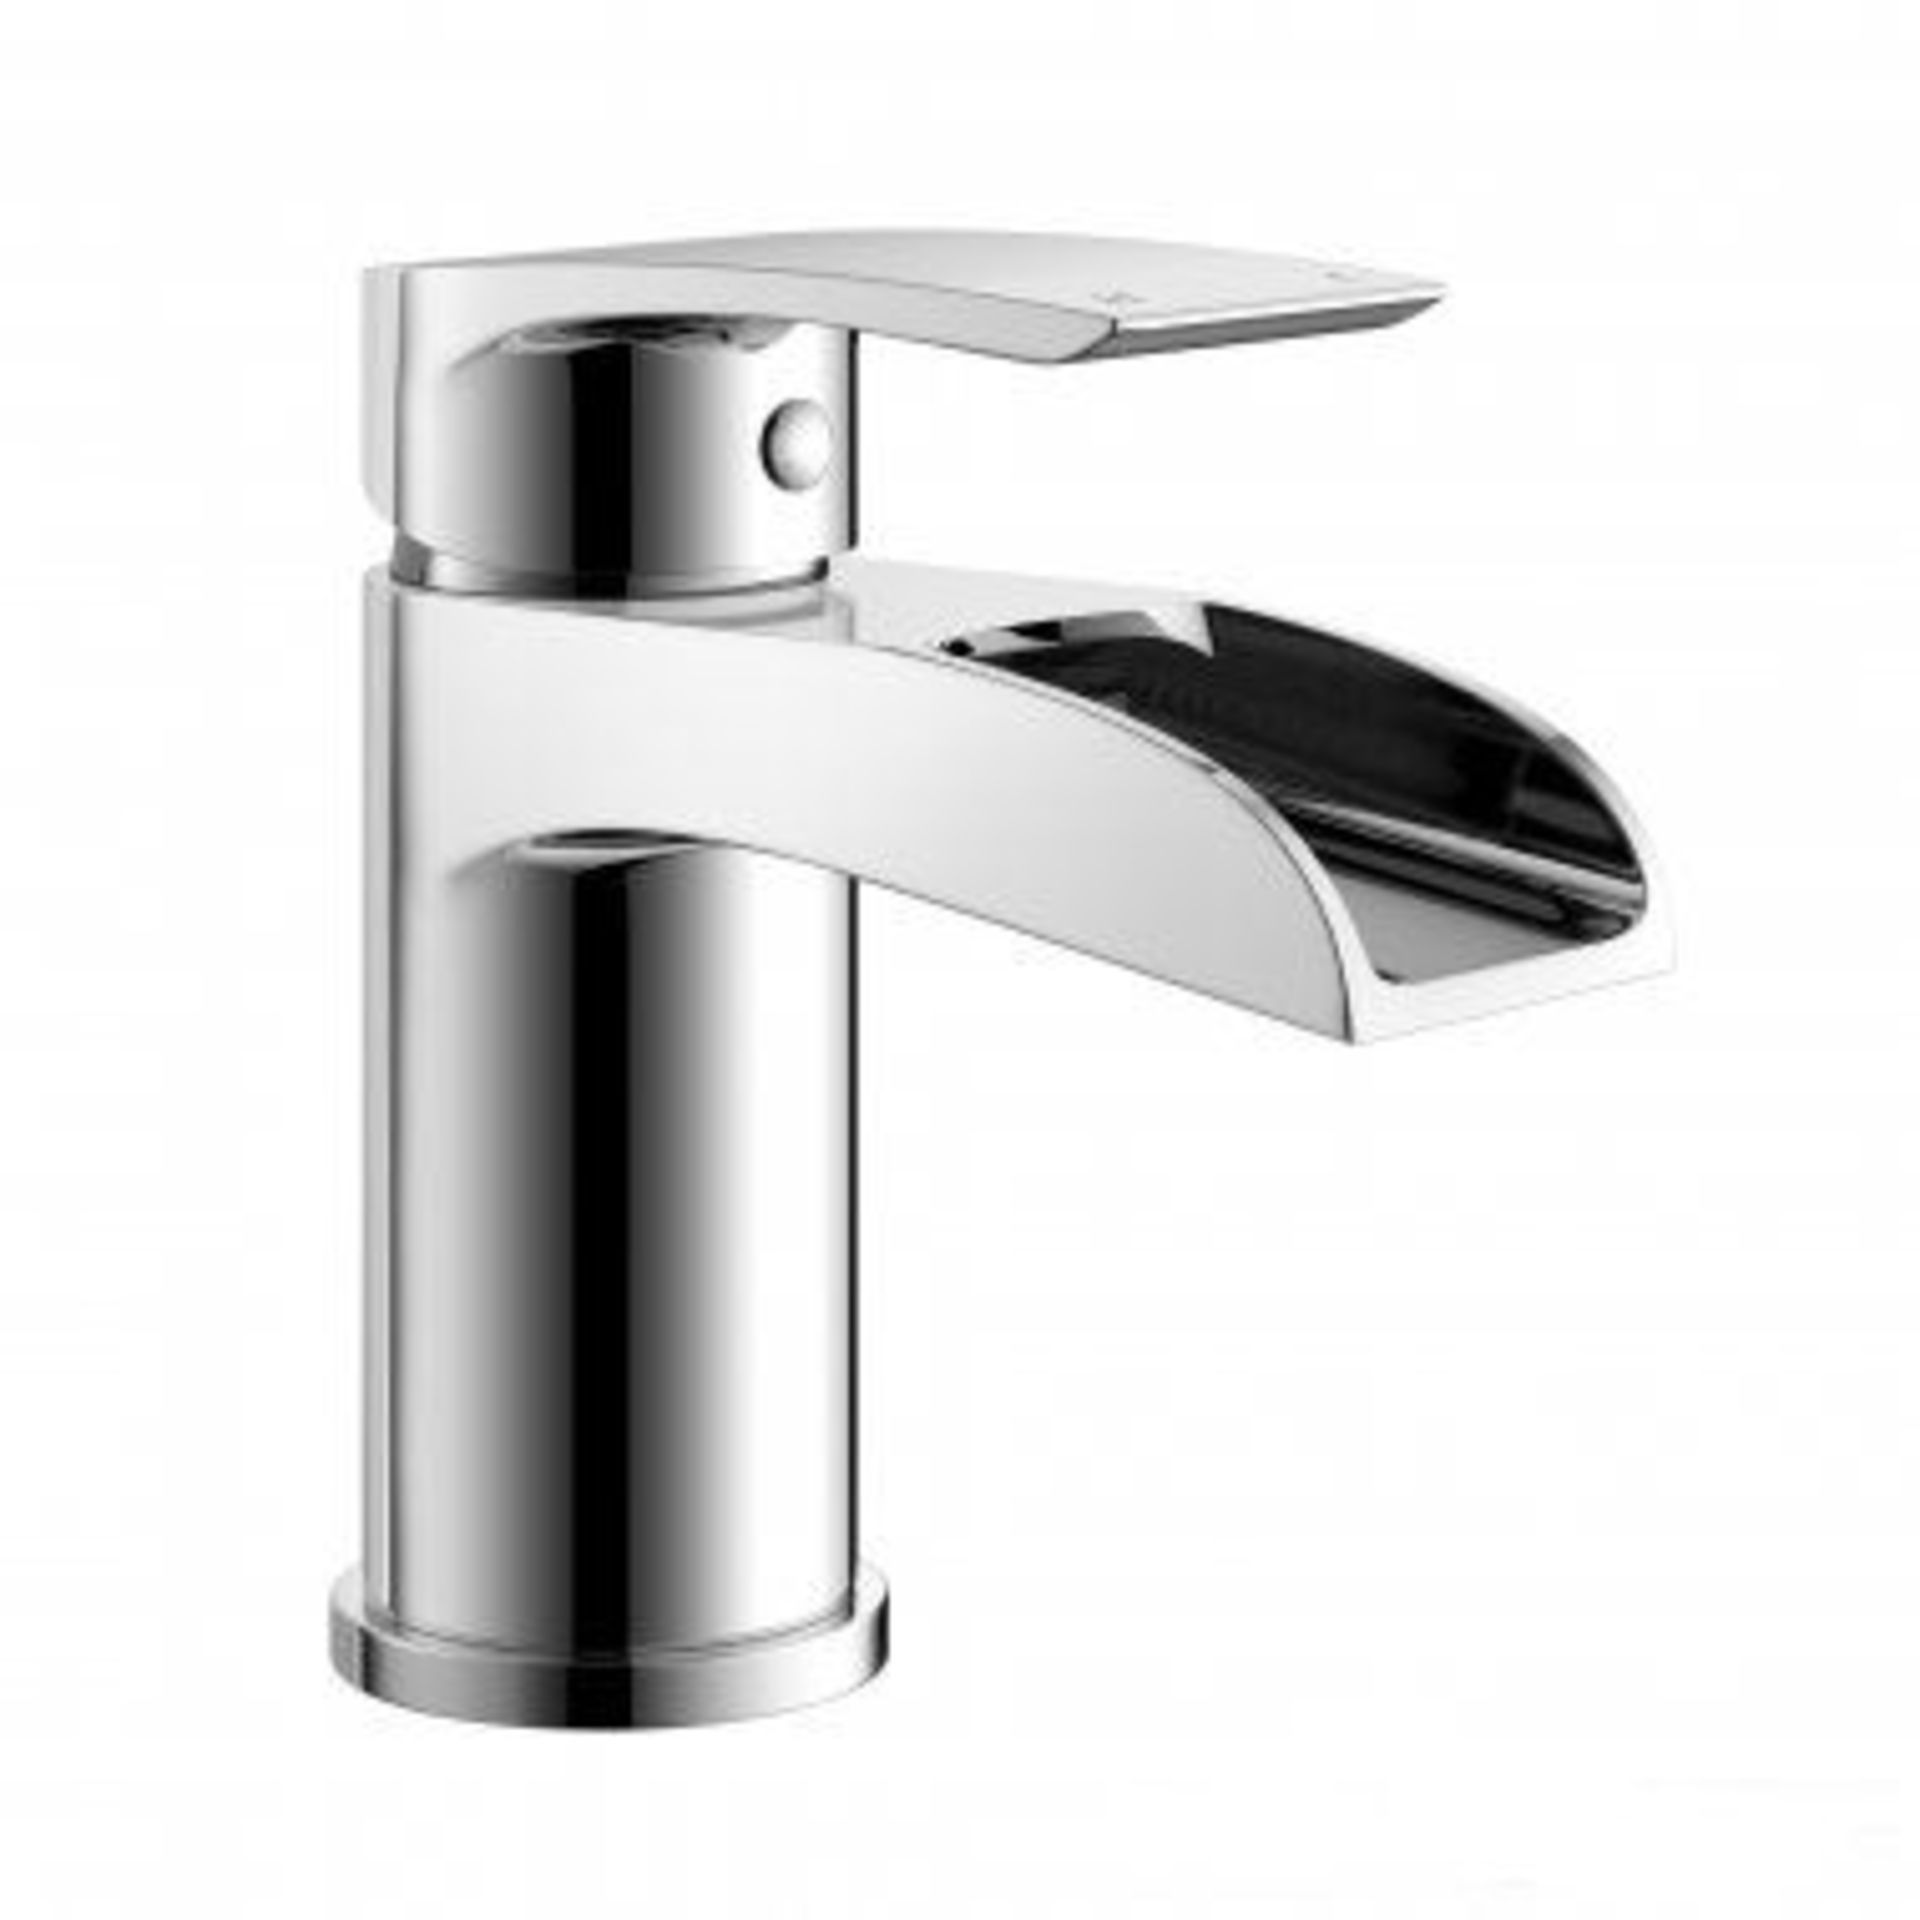 New & Boxed Avis Waterfall Basin Mixer Tap. Tb151.Chrome Plated Solid Brass Mirror Finish Lates... - Image 2 of 2